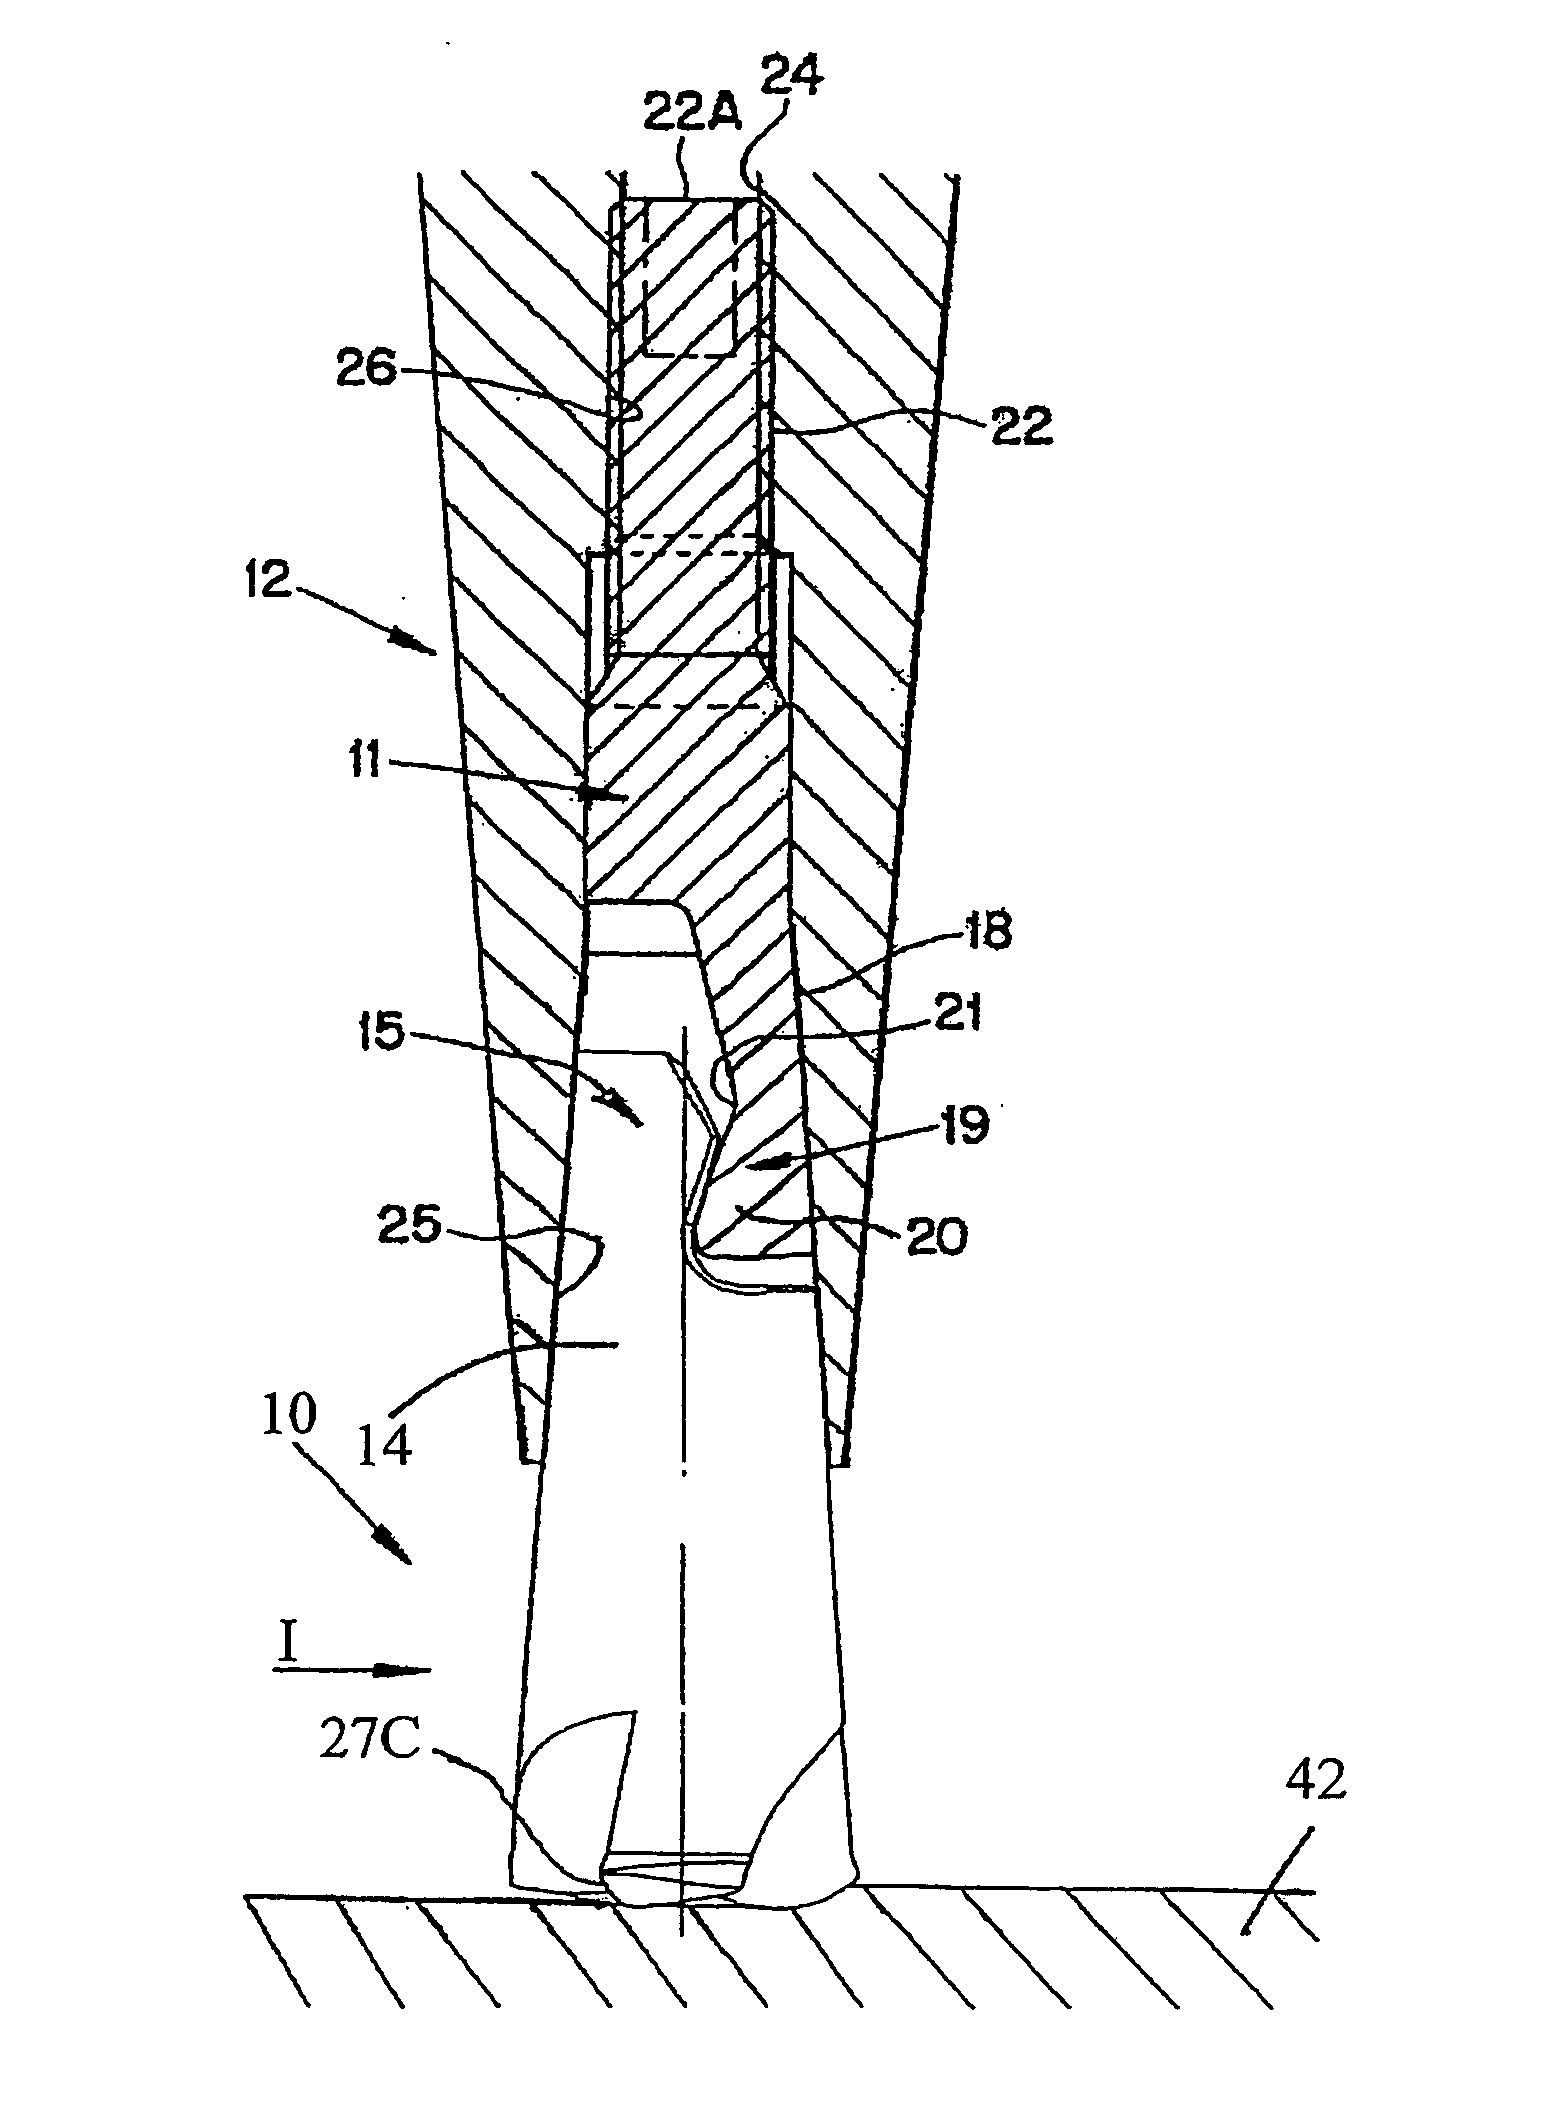 Milling cutter having three continuously curved cutting edges